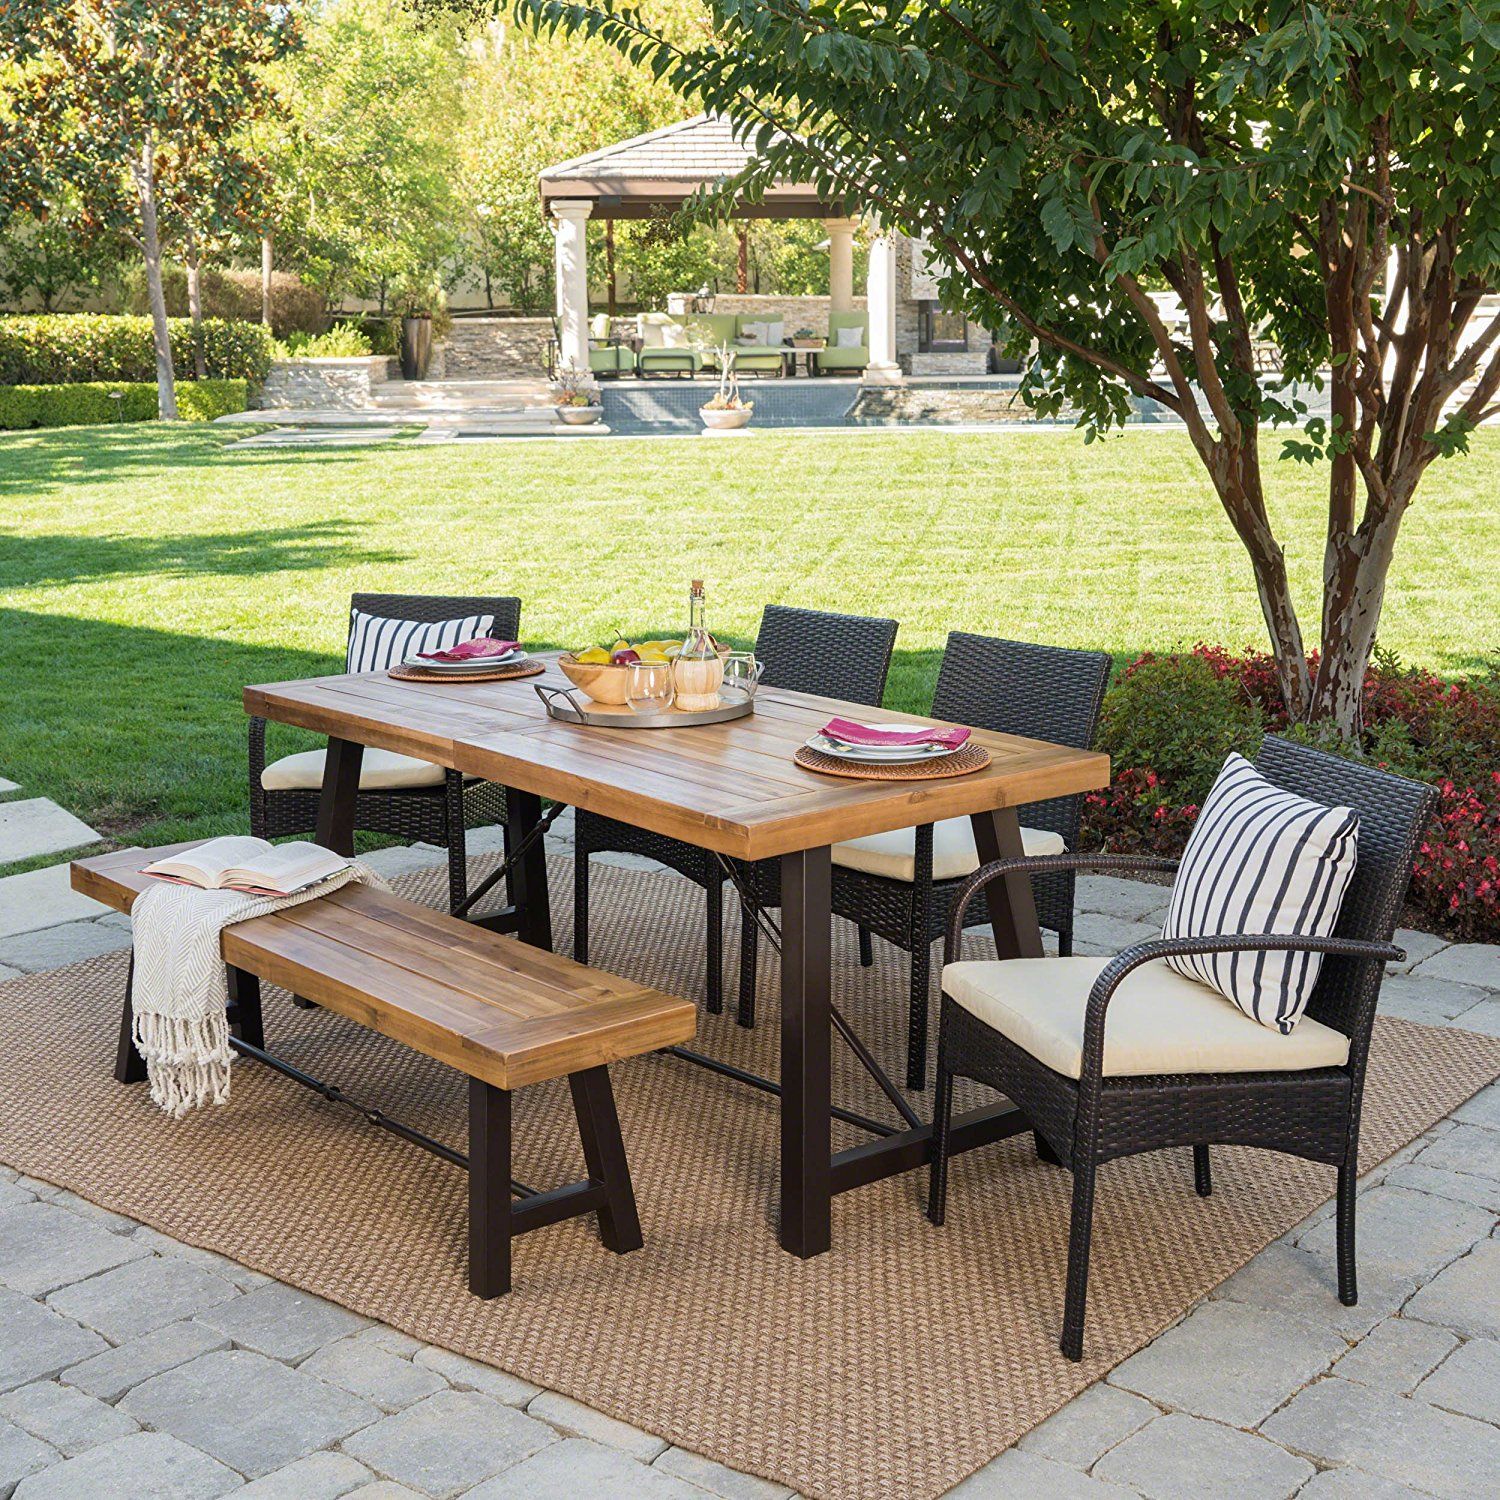 Luxury Furniture Review: Belham Outdoor 6 Piece Teak Finished Acacia With Regard To Teak Wicker Outdoor Dining Sets (View 9 of 15)